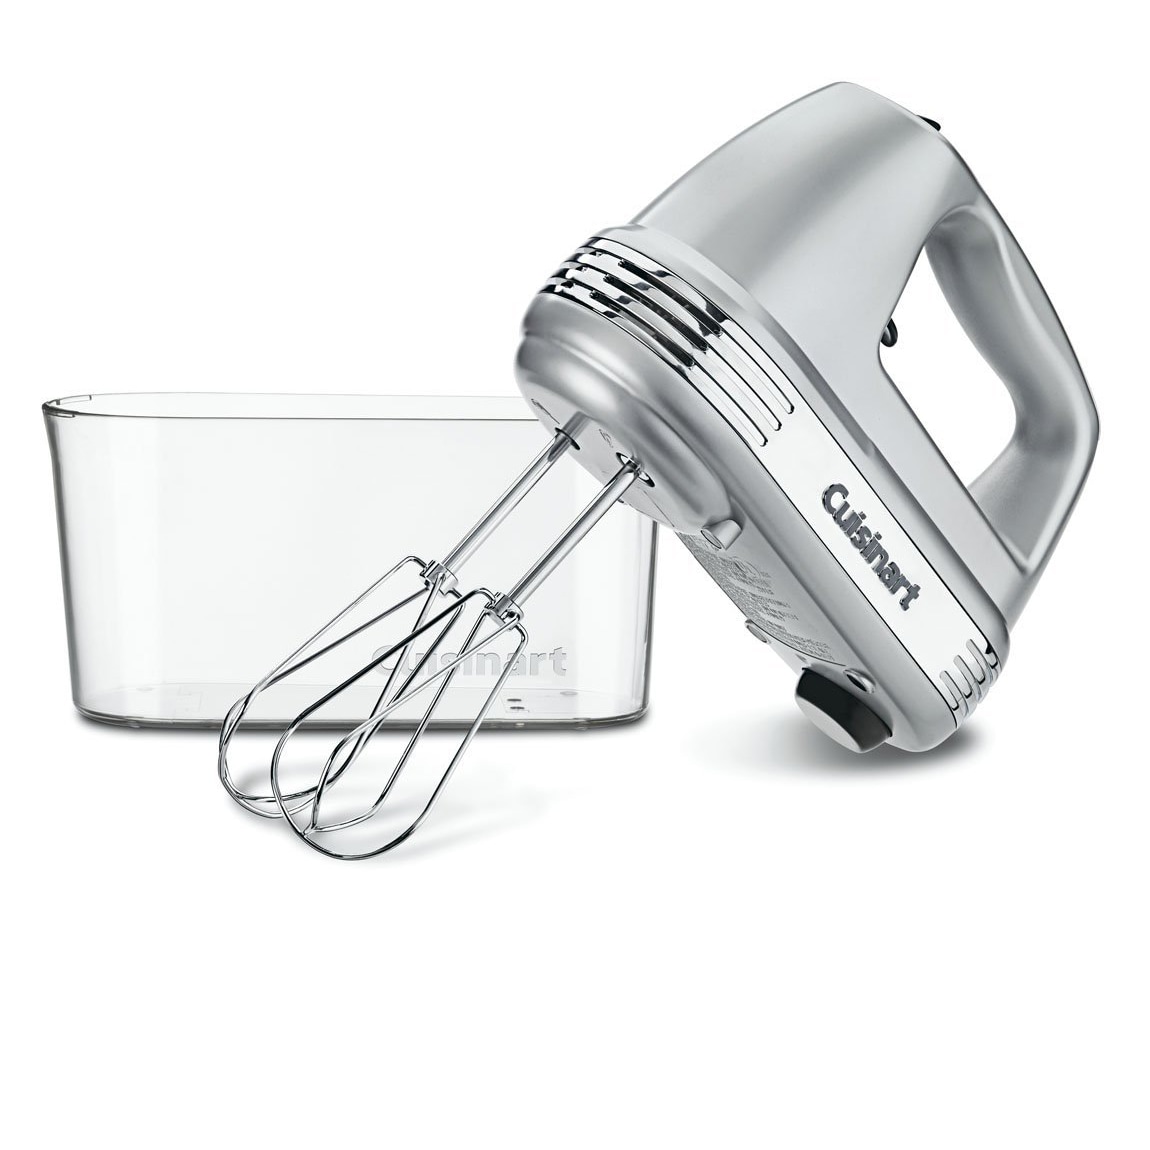 Rechargeable Hand Mixer With 3-Speed Control, Stainless Steel Beaters &  Whisk - Perfect For Baking, Gifts, And More! (White)